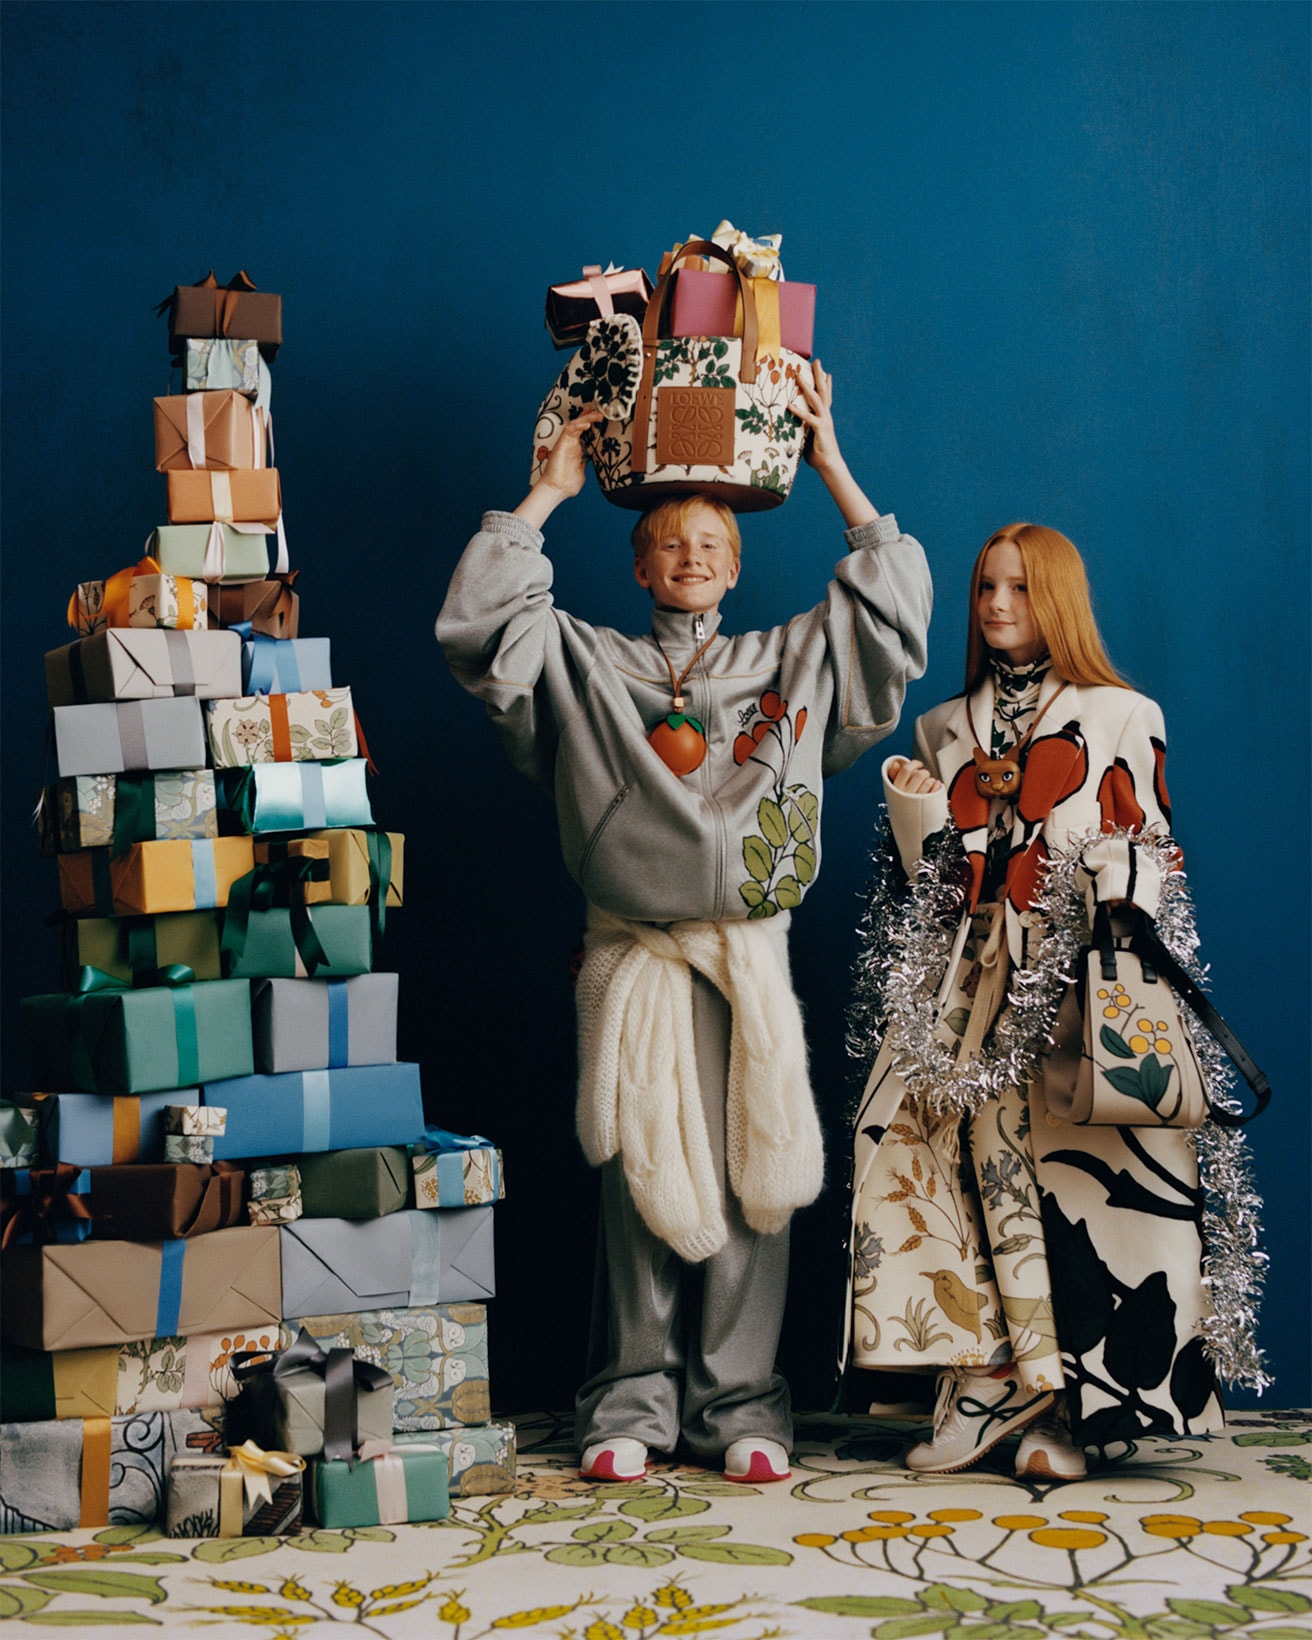 Loewe Holiday 2021 Collection Campaign Gifts Presents Boxes Coats Totes